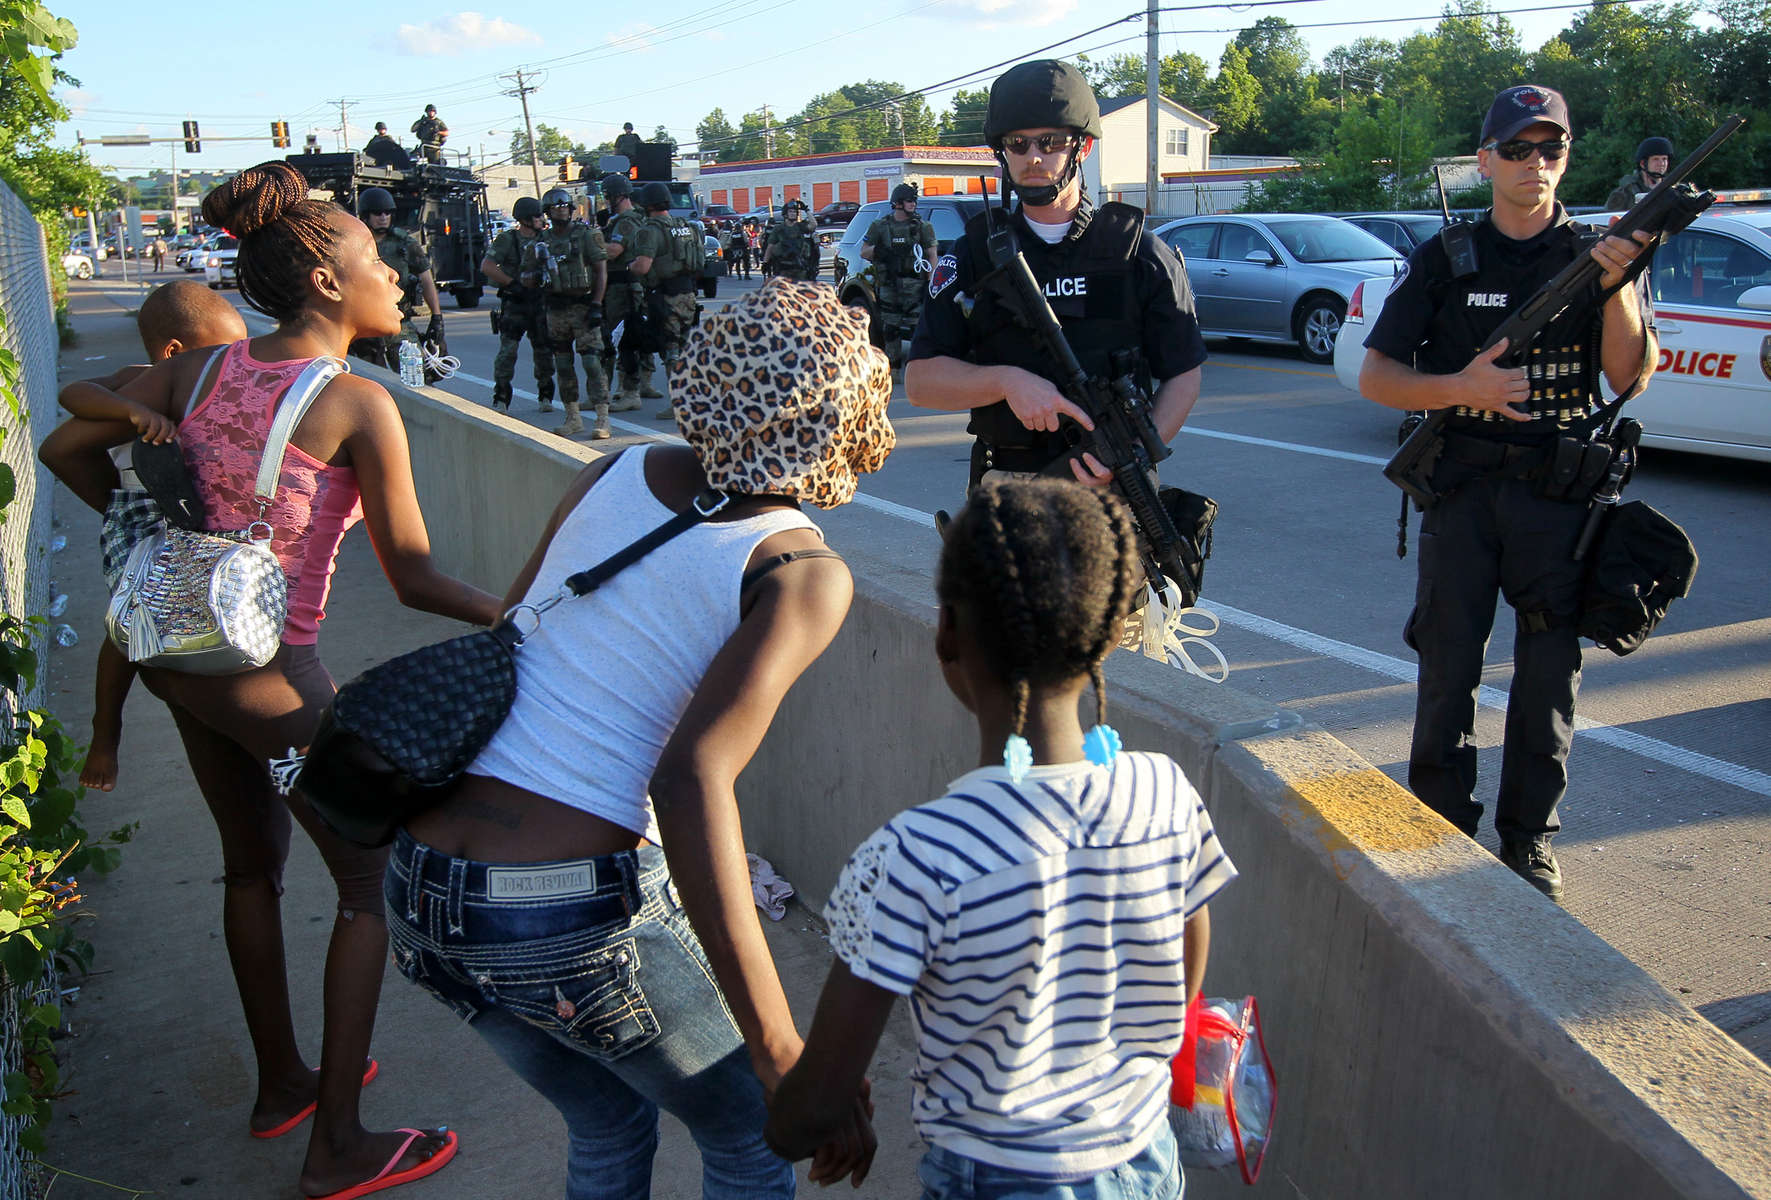 Women argue with police officers to let them pass and go home because they were afraid of being near the protest scene with their children if things turned violent along W. Florissant Avenue on Tuesday, Aug. 12, 2014.  The women were eventually allowed to pass, but not without a heated argument between them, the crowd and the police.Photo By David Carson, dcarson@post-dispatch.com